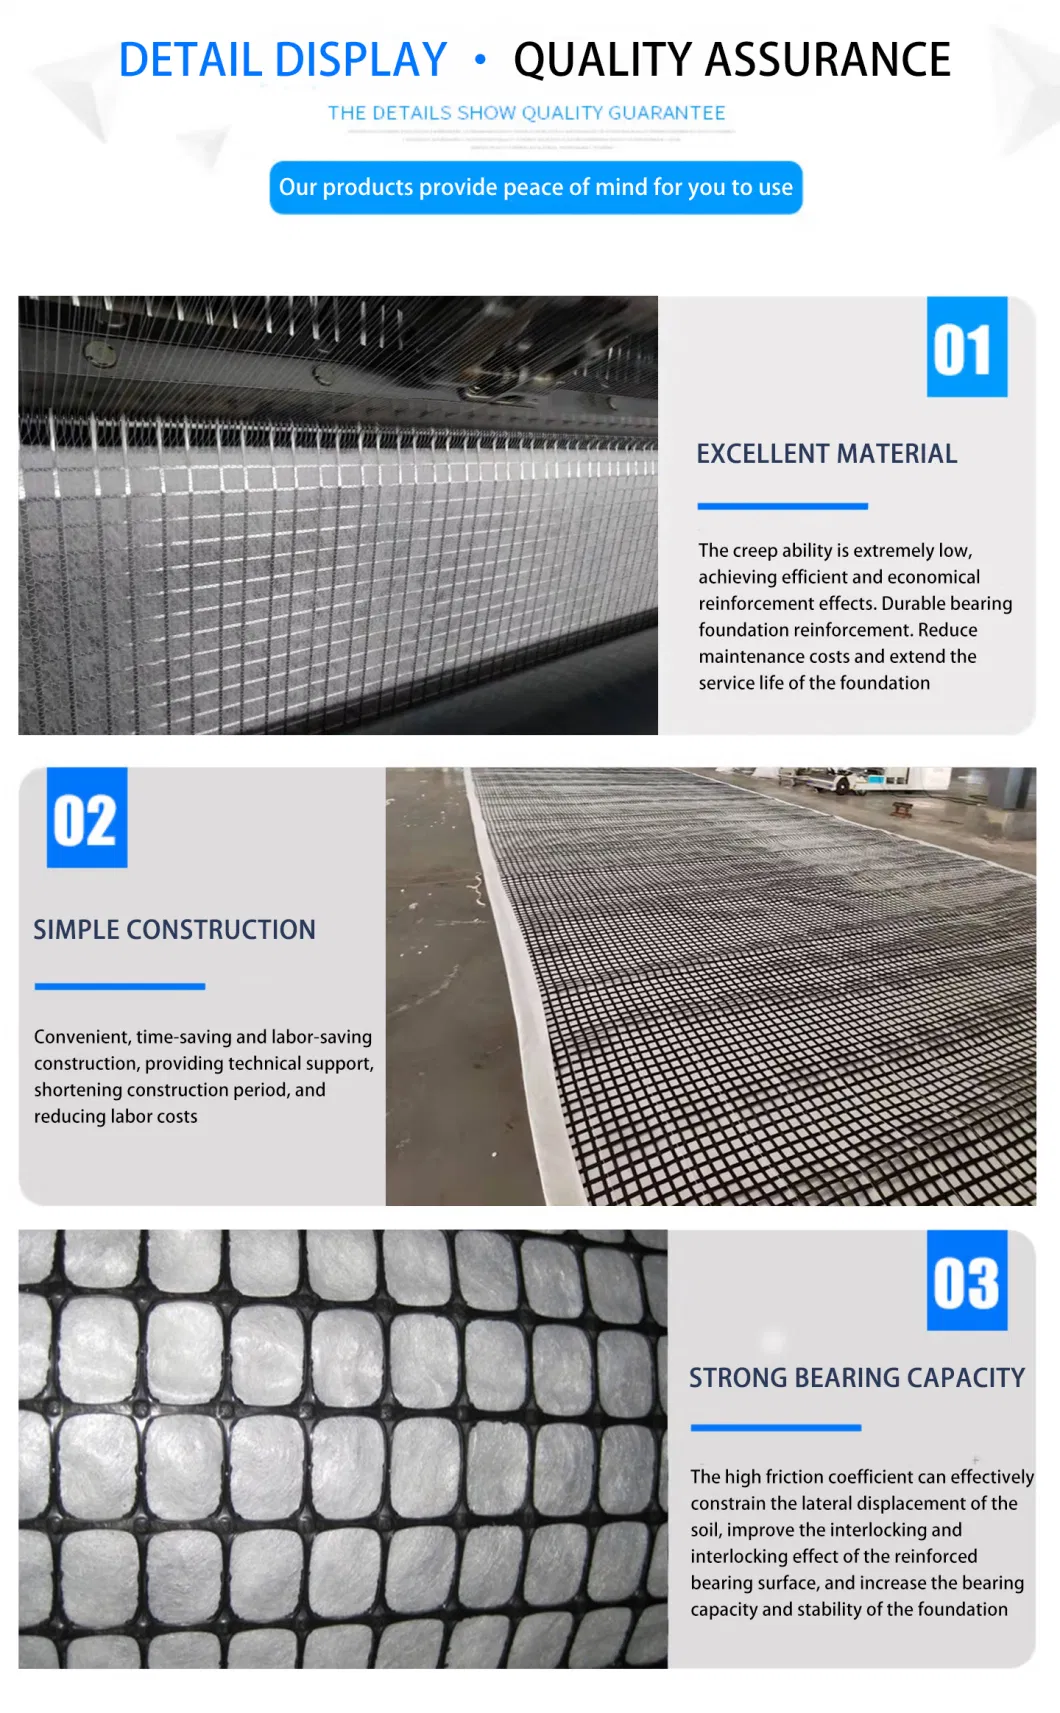 Fiberglass Geotextile with Geogrid Reinforced Composite Nonwoven Geotextile Good Sold